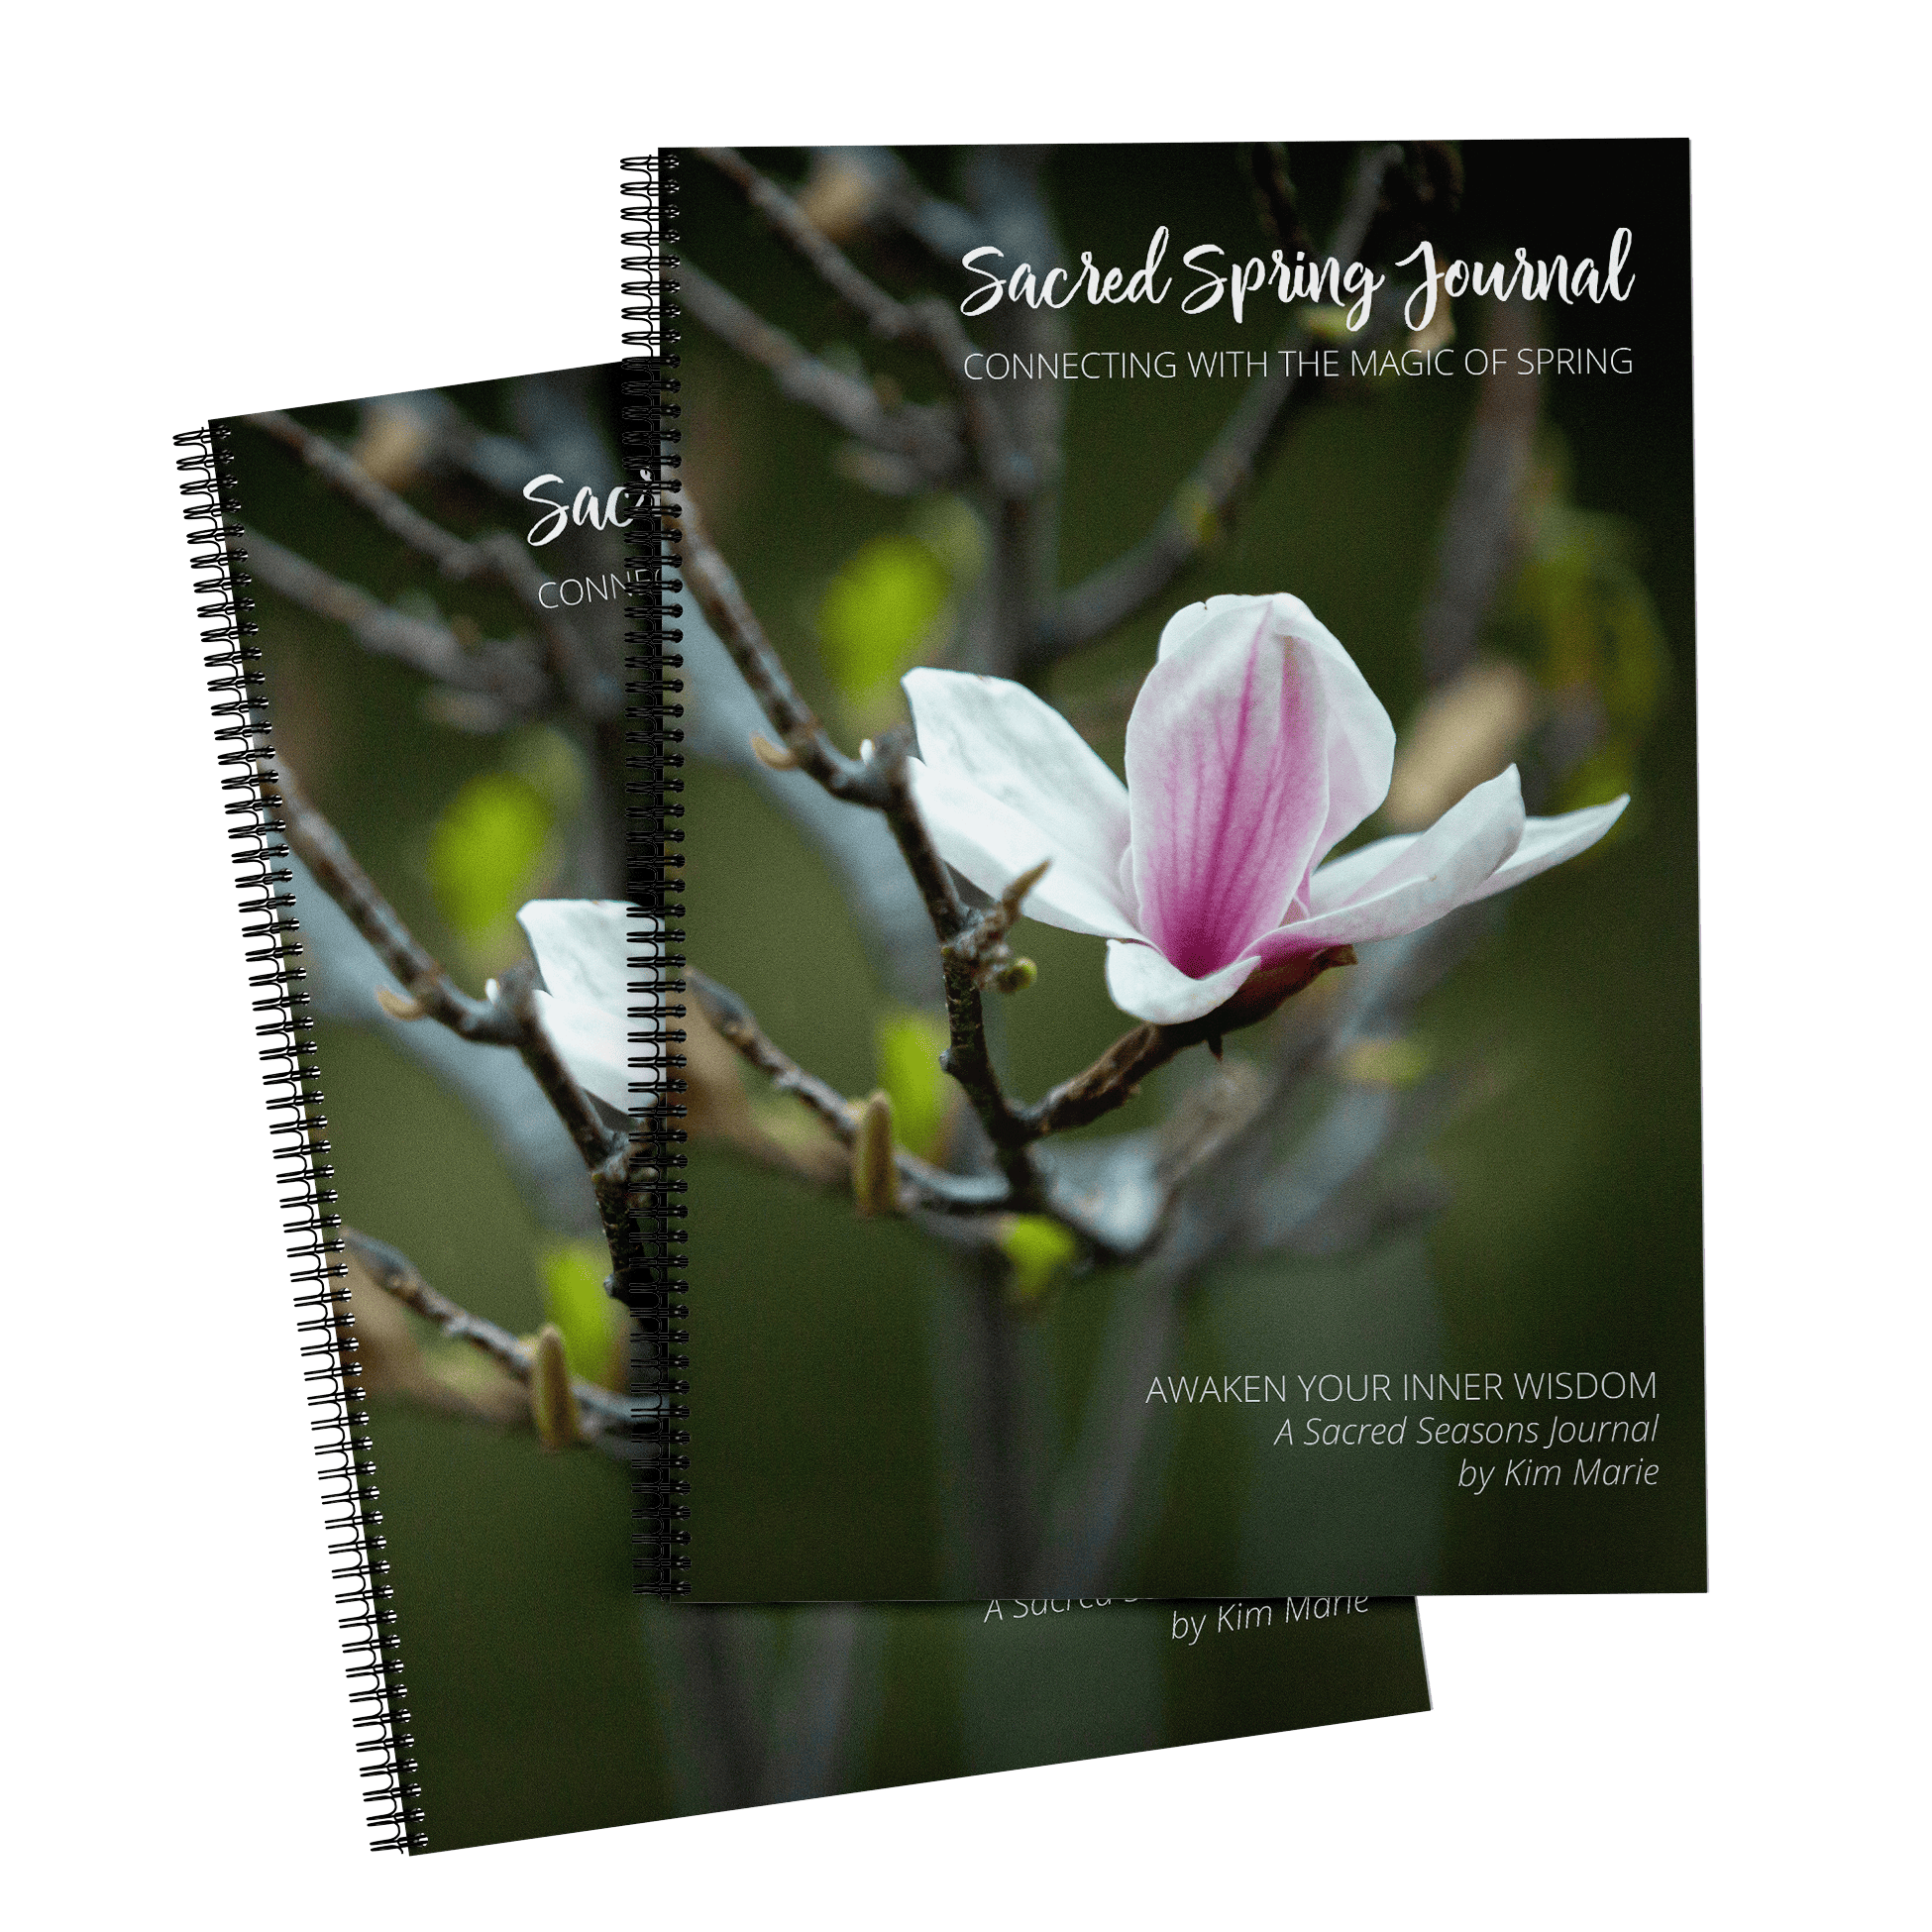 Sacred Spring Journal, part of Sacred Seasons Journals by Kim Marie. Connect with Nature and yourself by connecting with the Seasons.